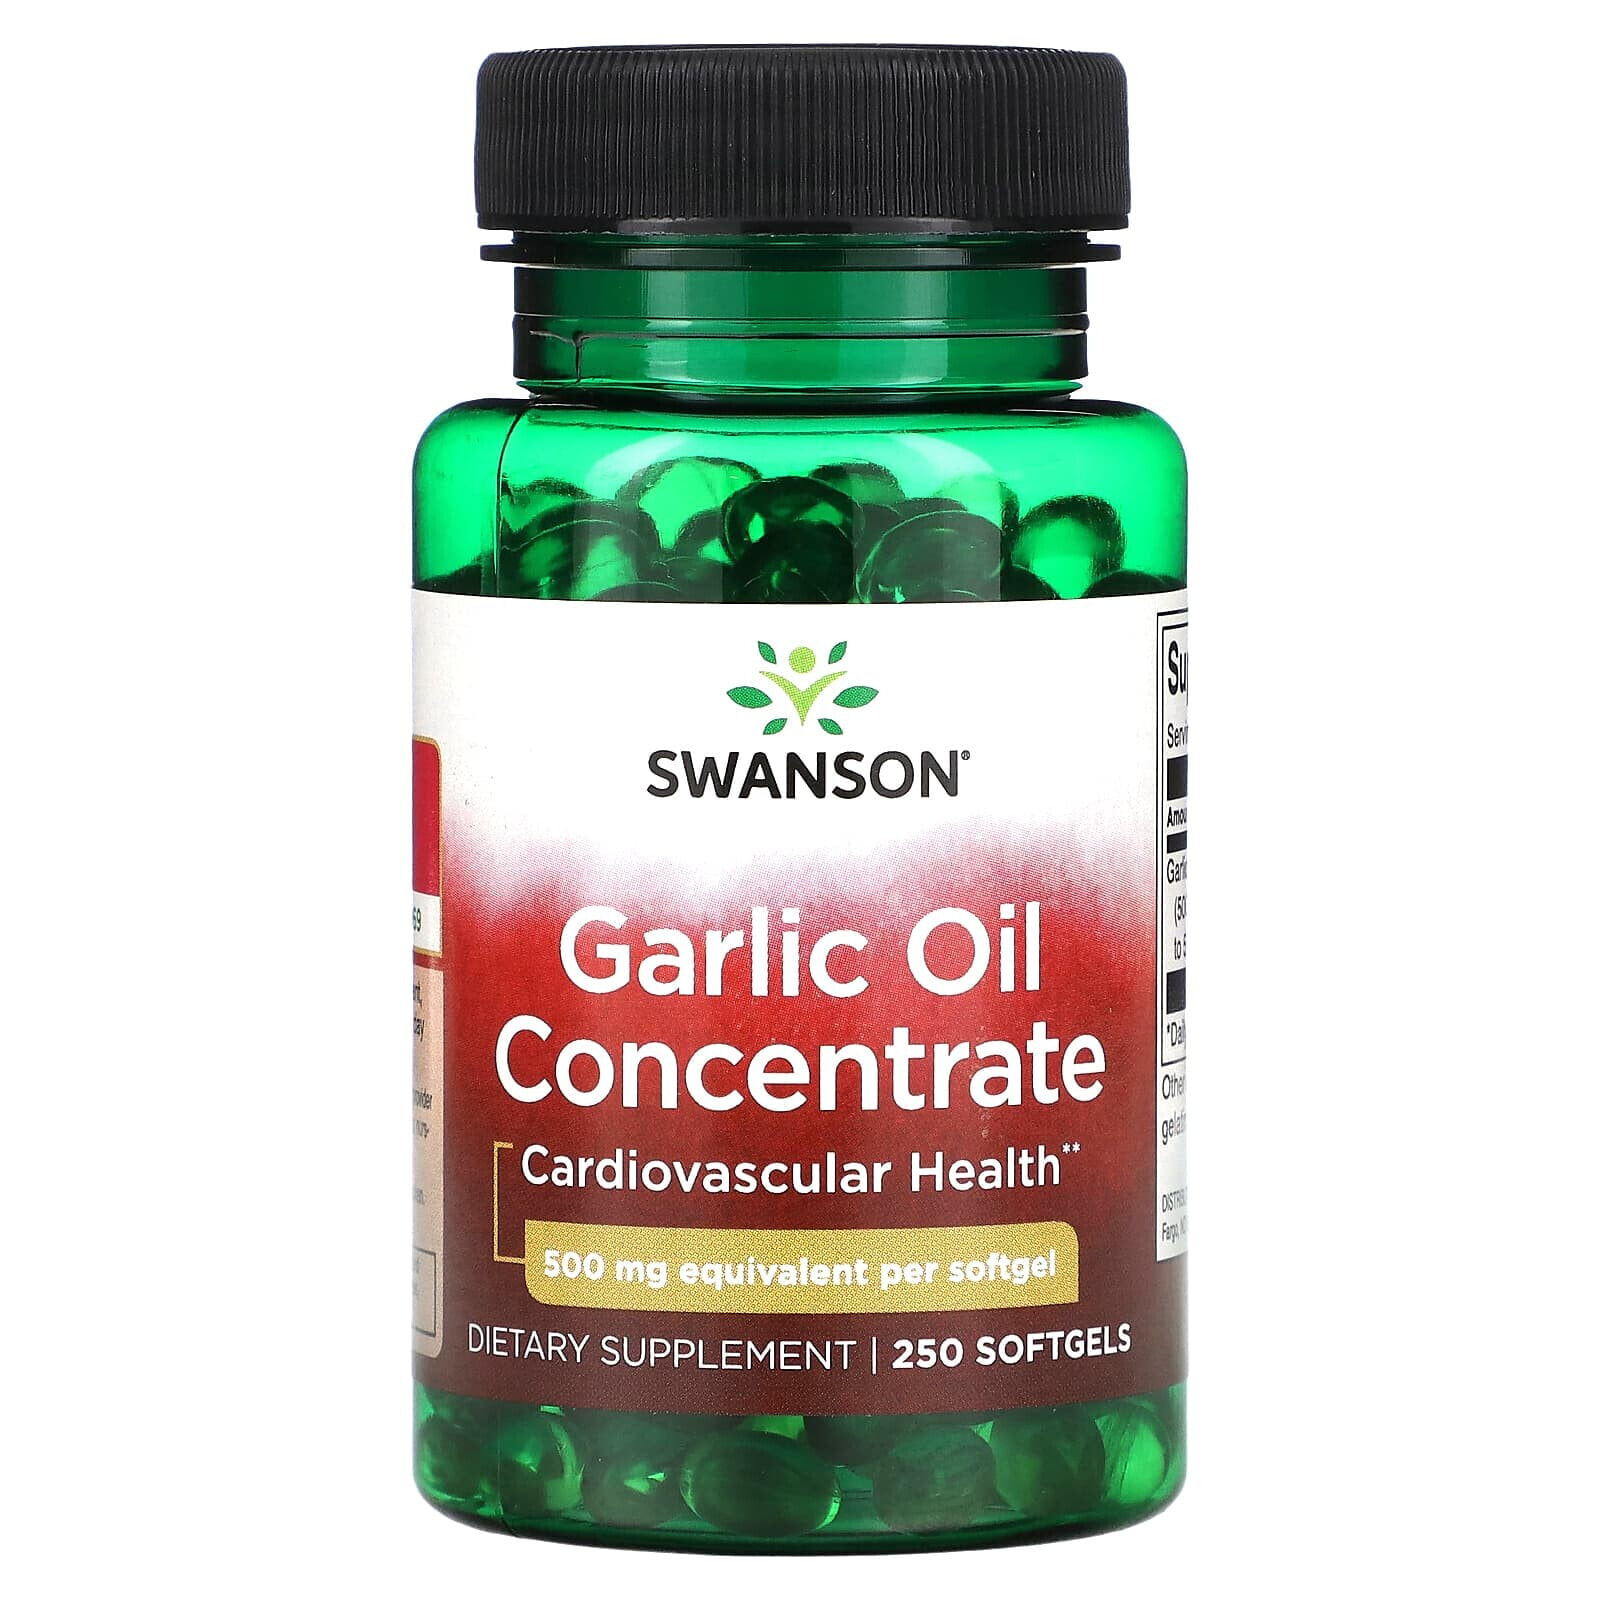 Garlic Oil Concentrate, 500 mg, 250 Softgels